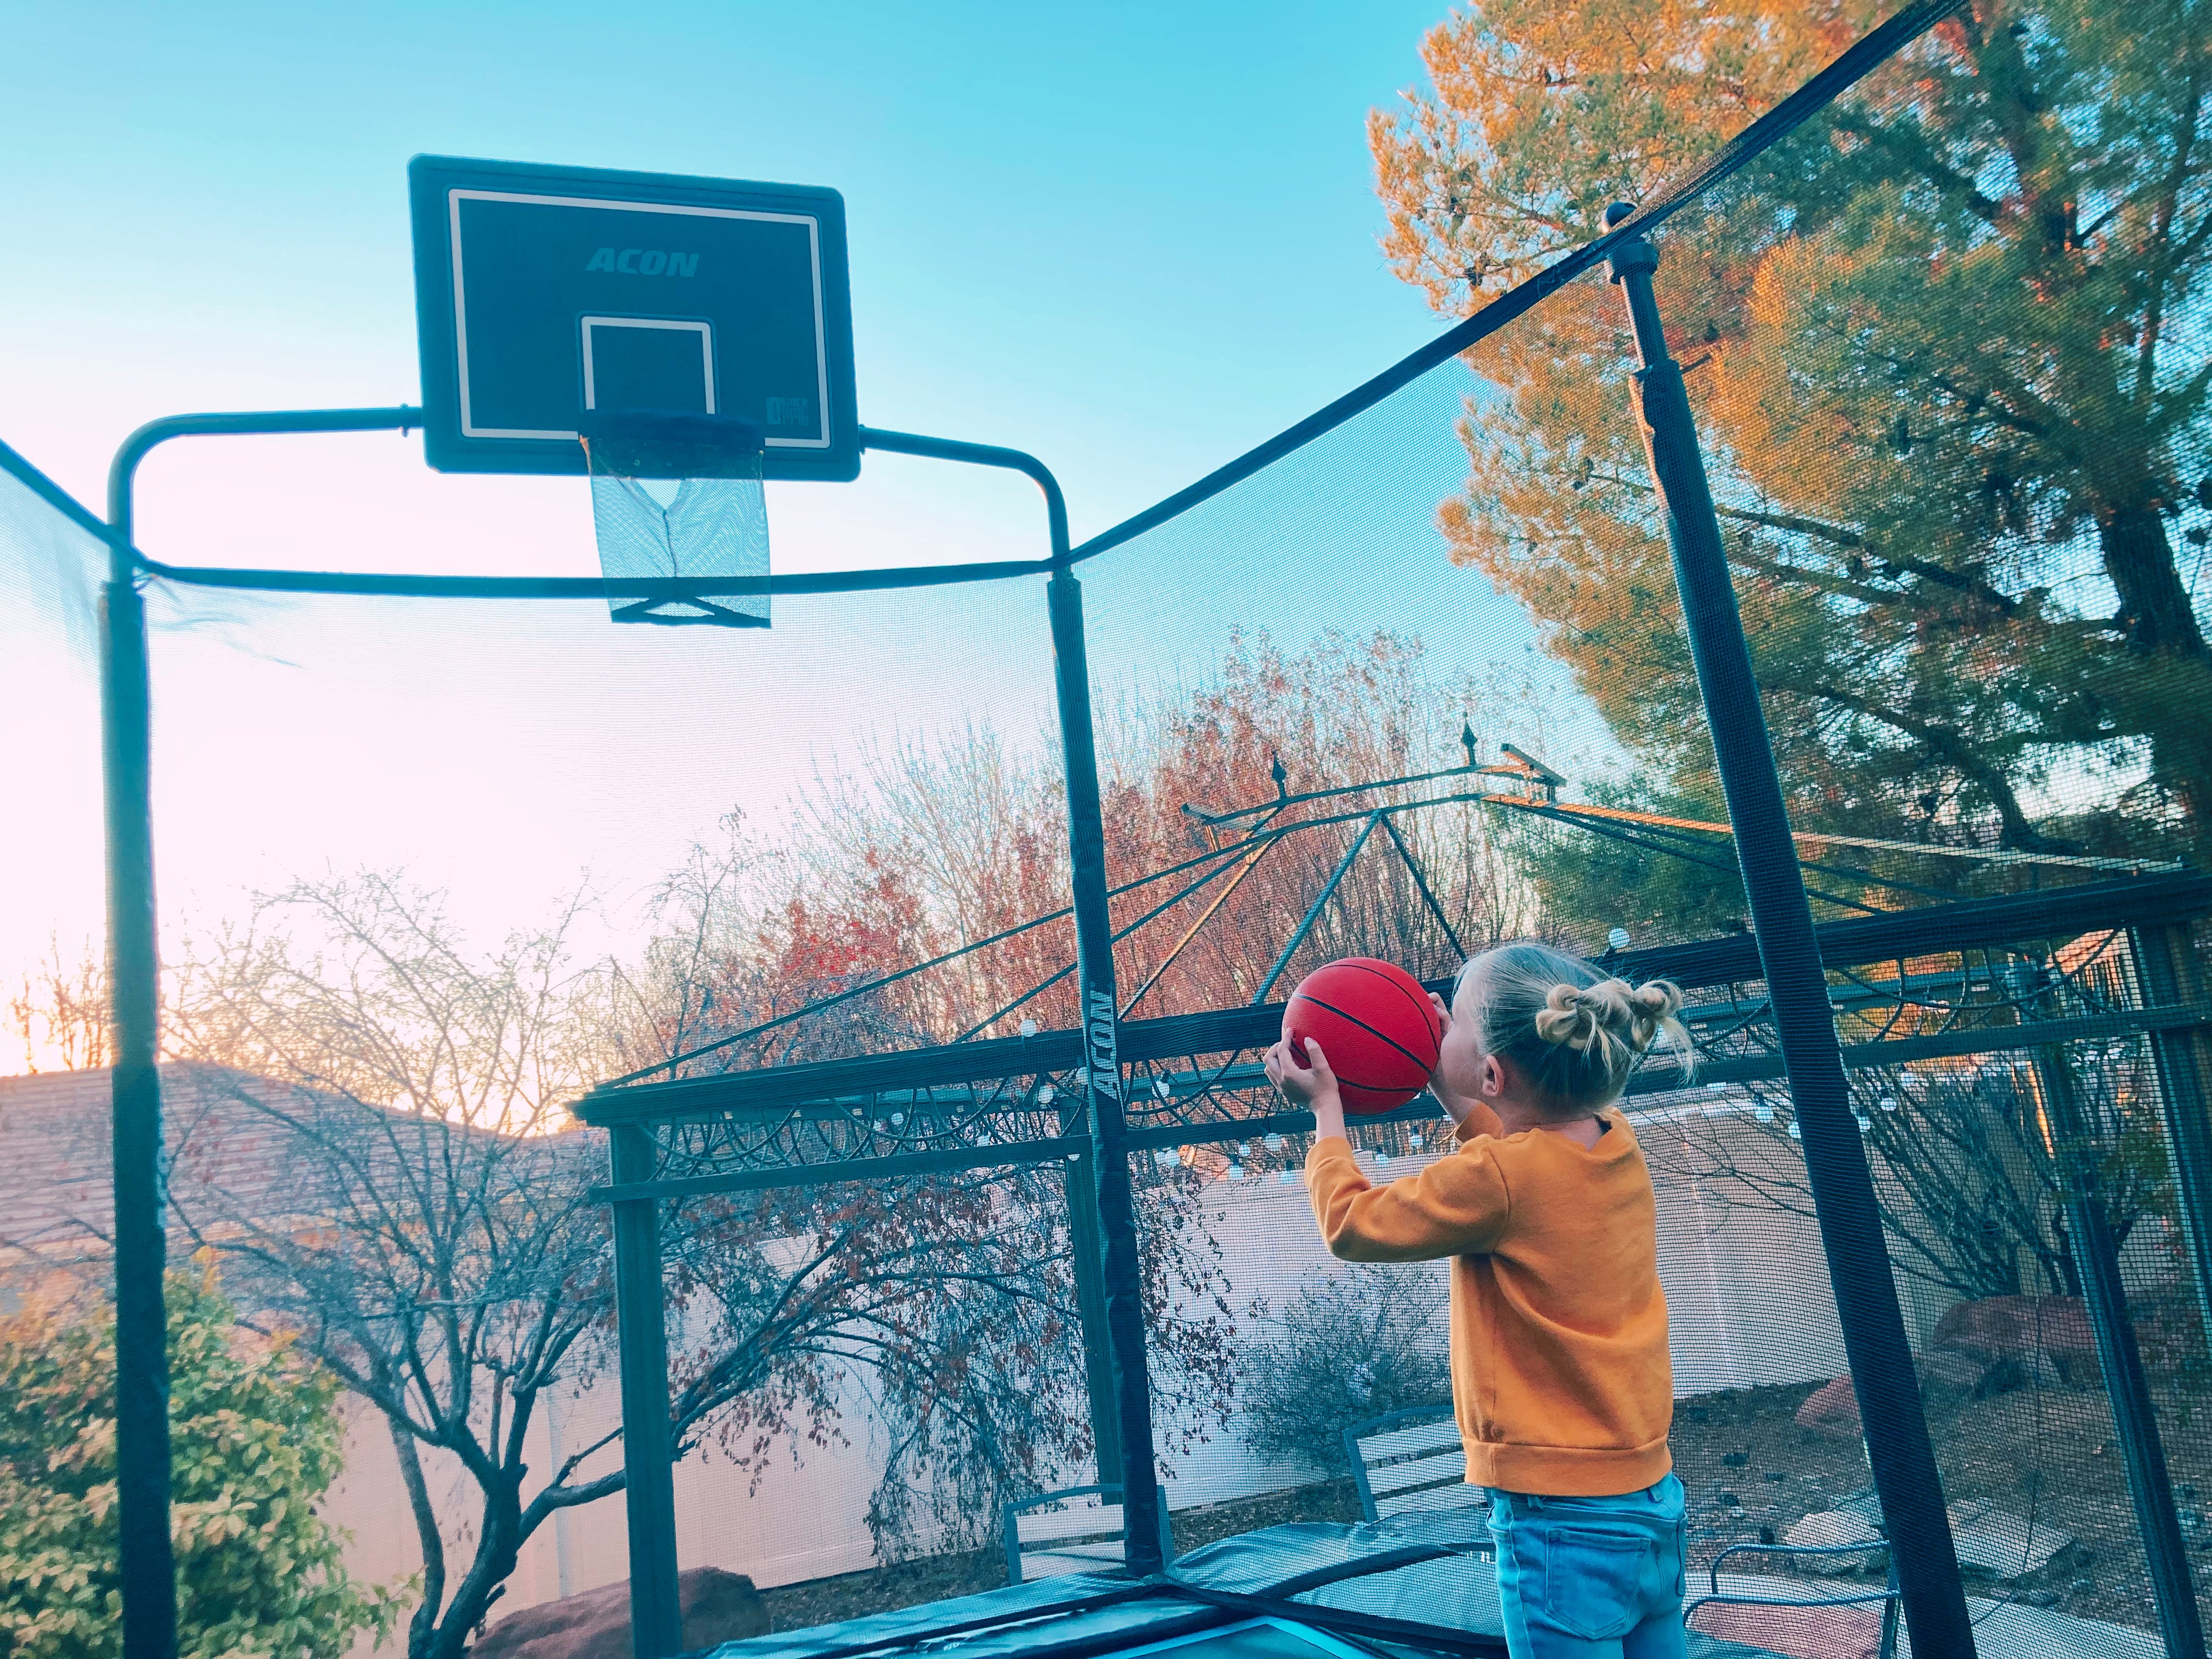 A little girl attempting to throw a basketball through a hoop on a trampoline with net